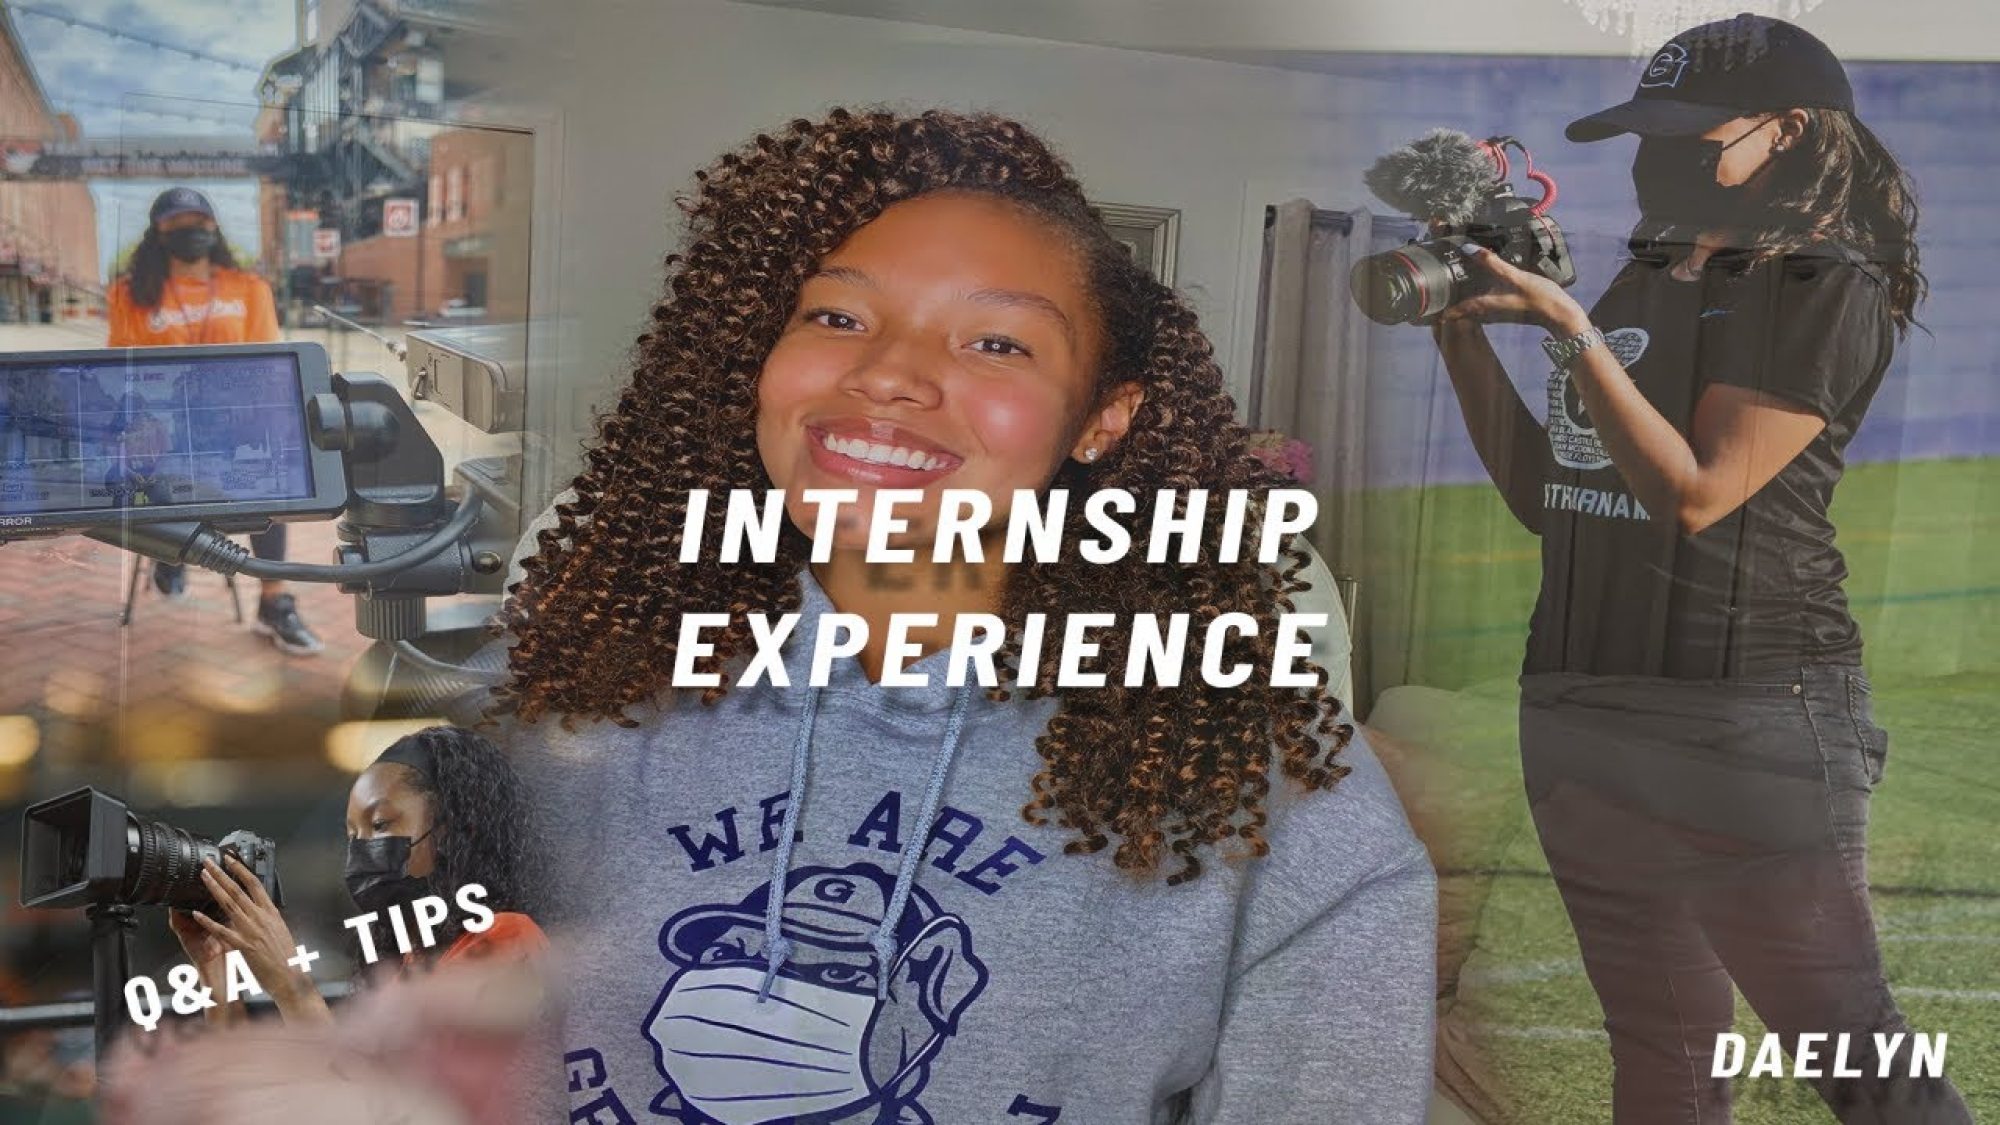 Combined previews of Daelyn with the text &quot;Internship Experience&quot;